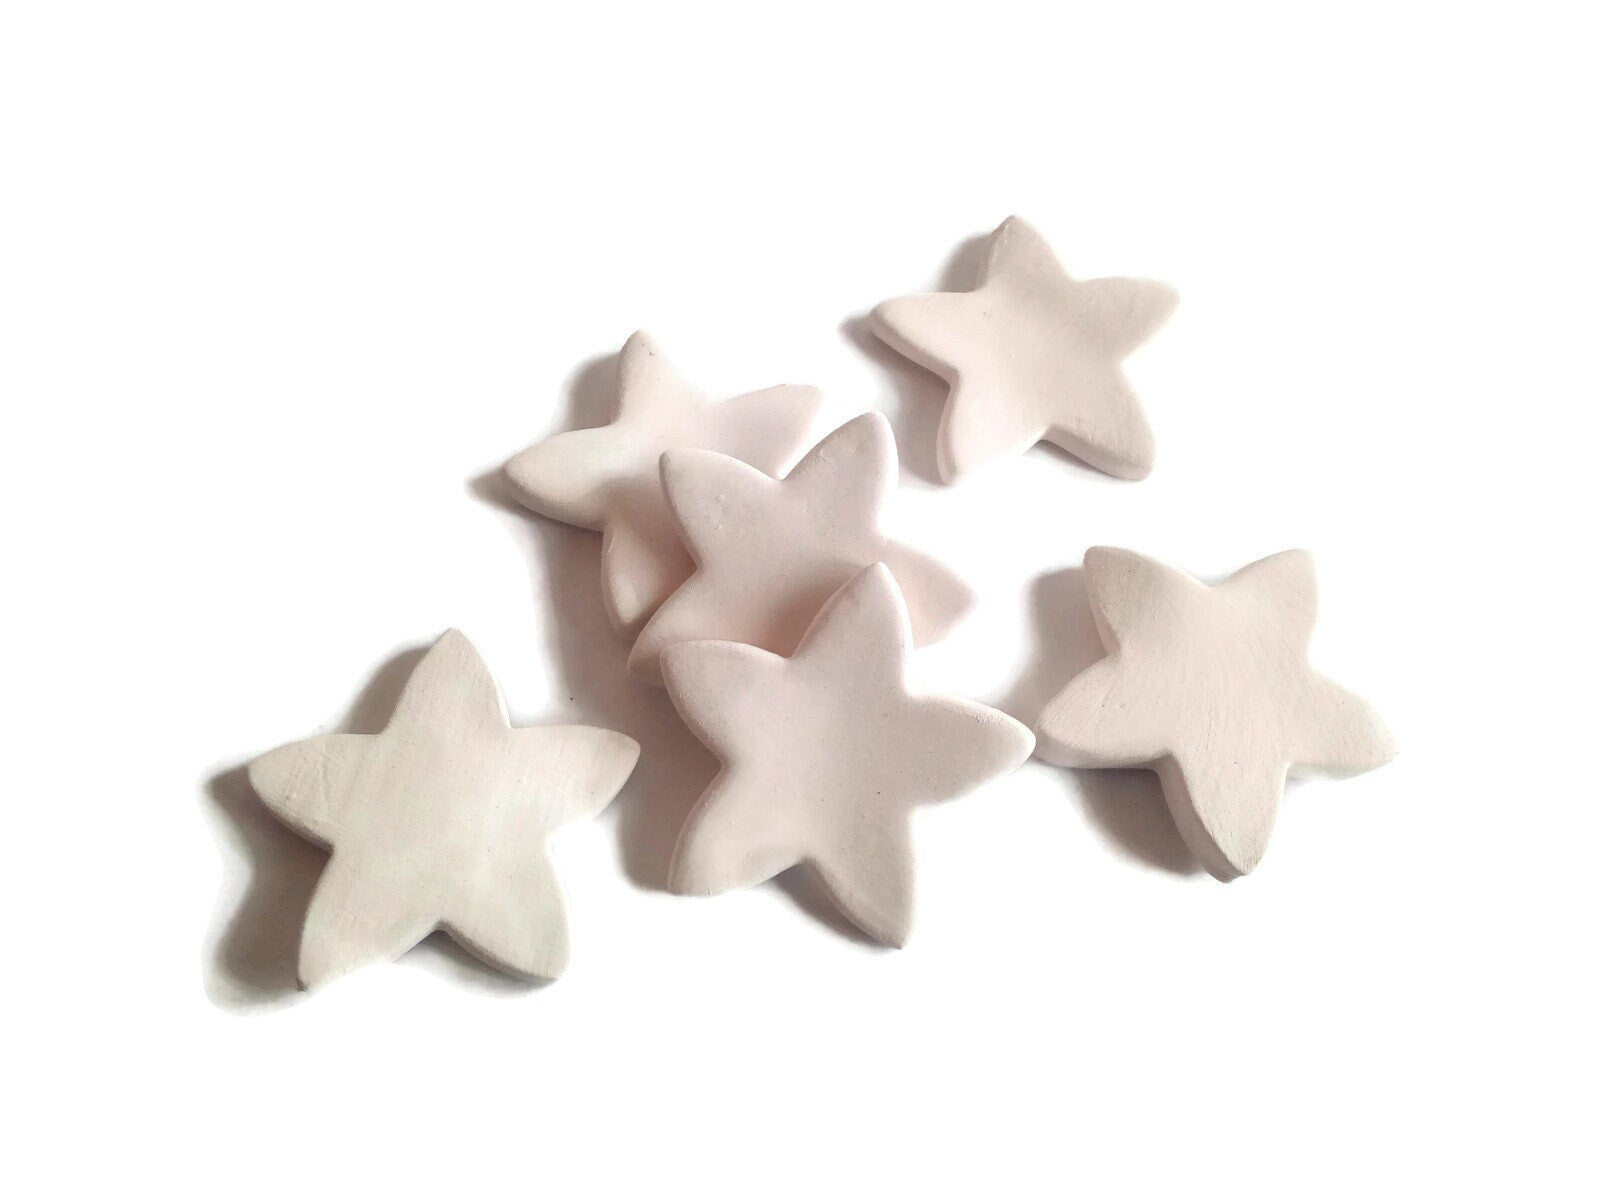 6Pc 45mm Small Ceramic Tiles Star Shaped, Tiny Mosaic Tiles For Crafts, Unpainted Ceramic Bisque Ready To Paint, Best Sellers Handmade - Ceramica Ana Rafael